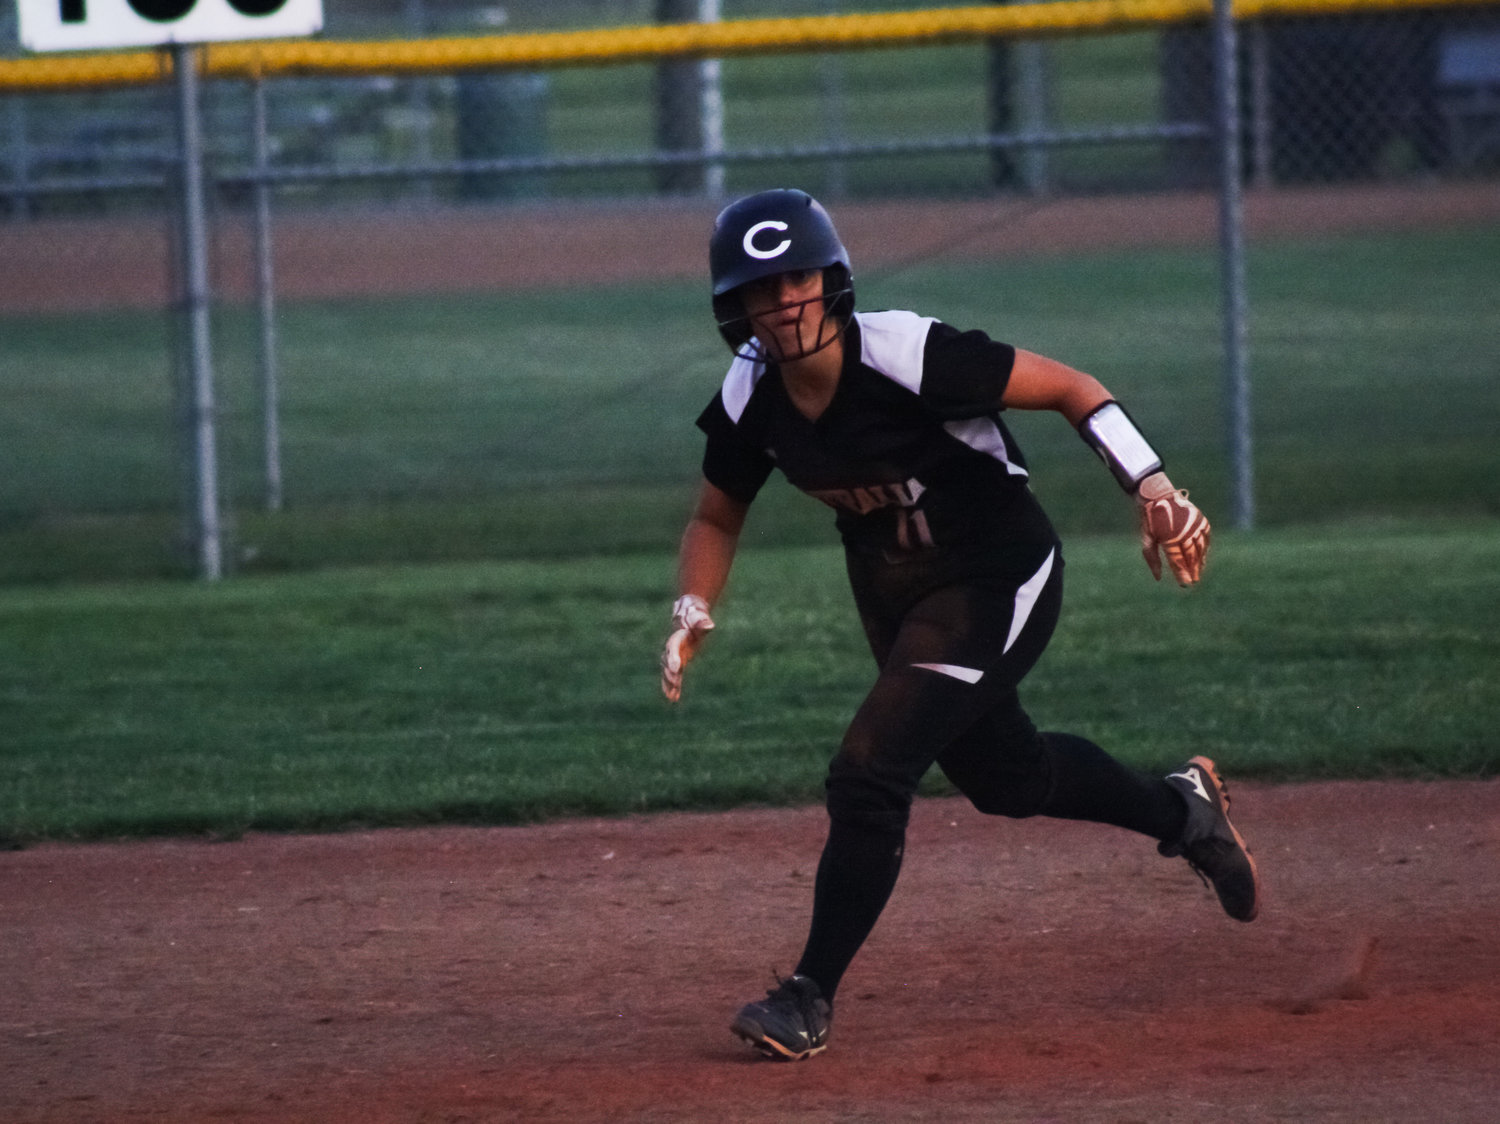 Centralia junior third baseman Ellie Page takes a lead off second base in a Sept. 13 home game against Mexico. Page finished with four hits Thursday in a 16-1 win at Clarence Cannon Conference foe Clark County.